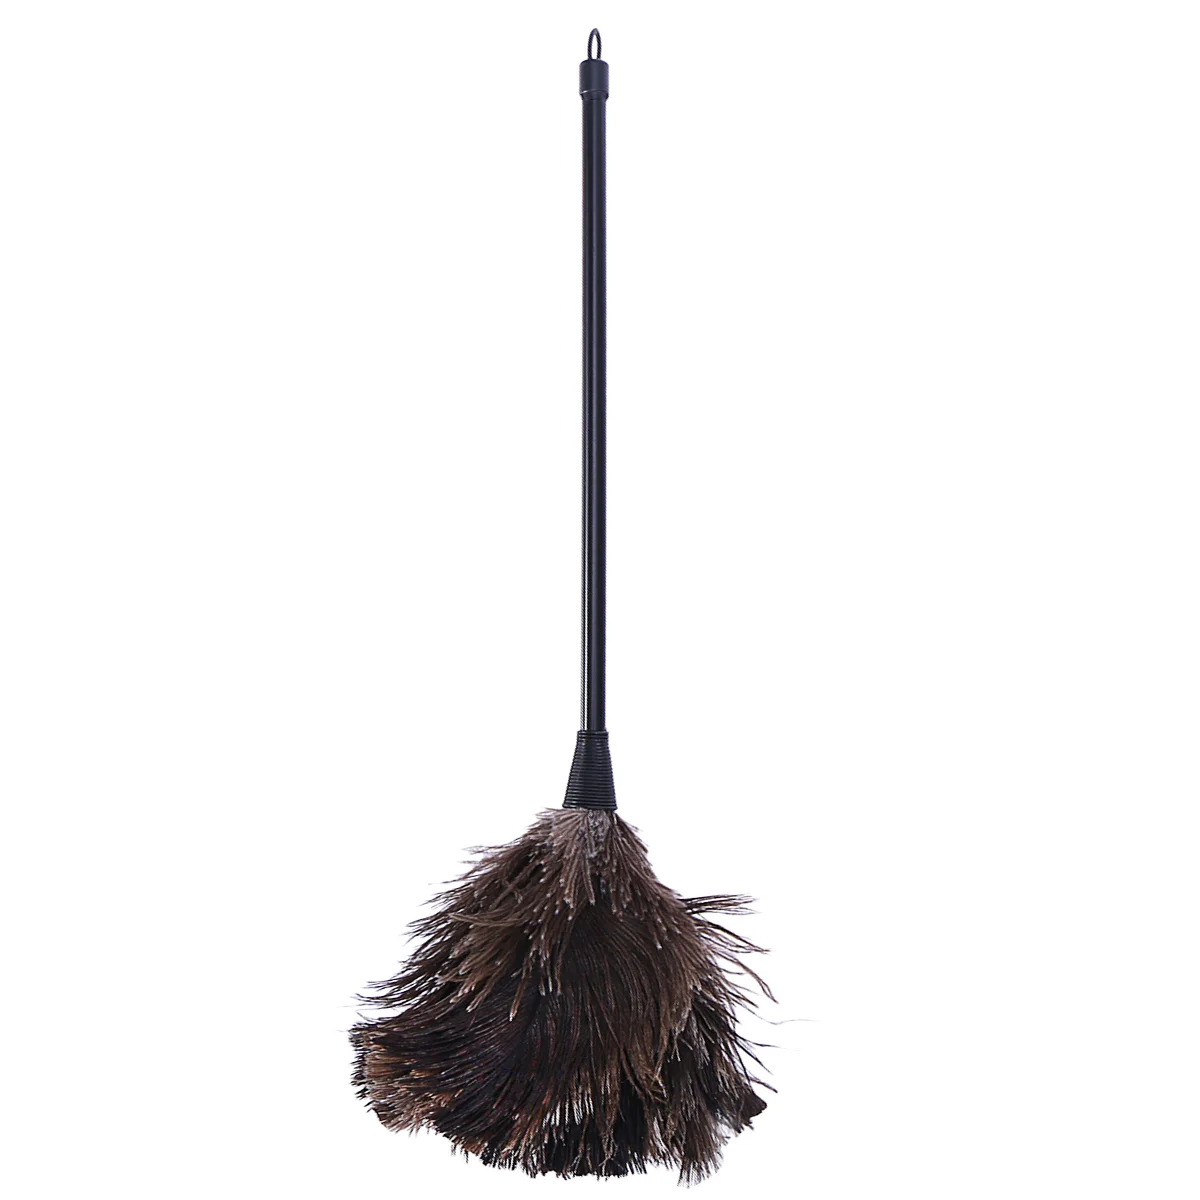 Duster Cleaning Dusters Ostrich Handled Tool Handle Brush Reusable Maid Ceiling Fans Mini Real Swifter Home Refills Retractable